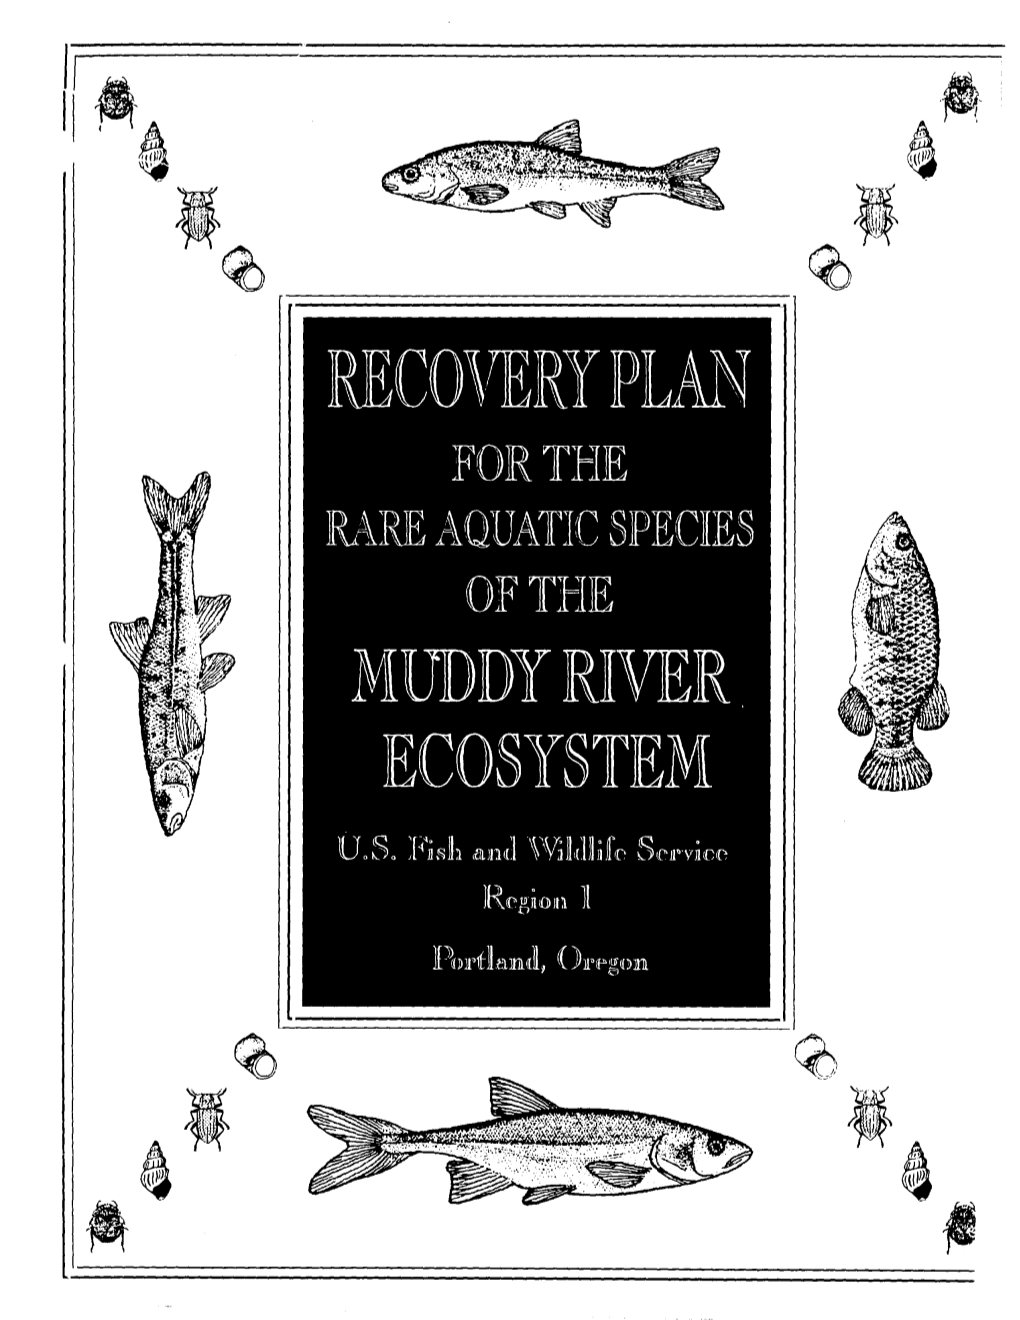 Recovery Plan for the Rare Aquatic Species of the Muddy River Ecosystem